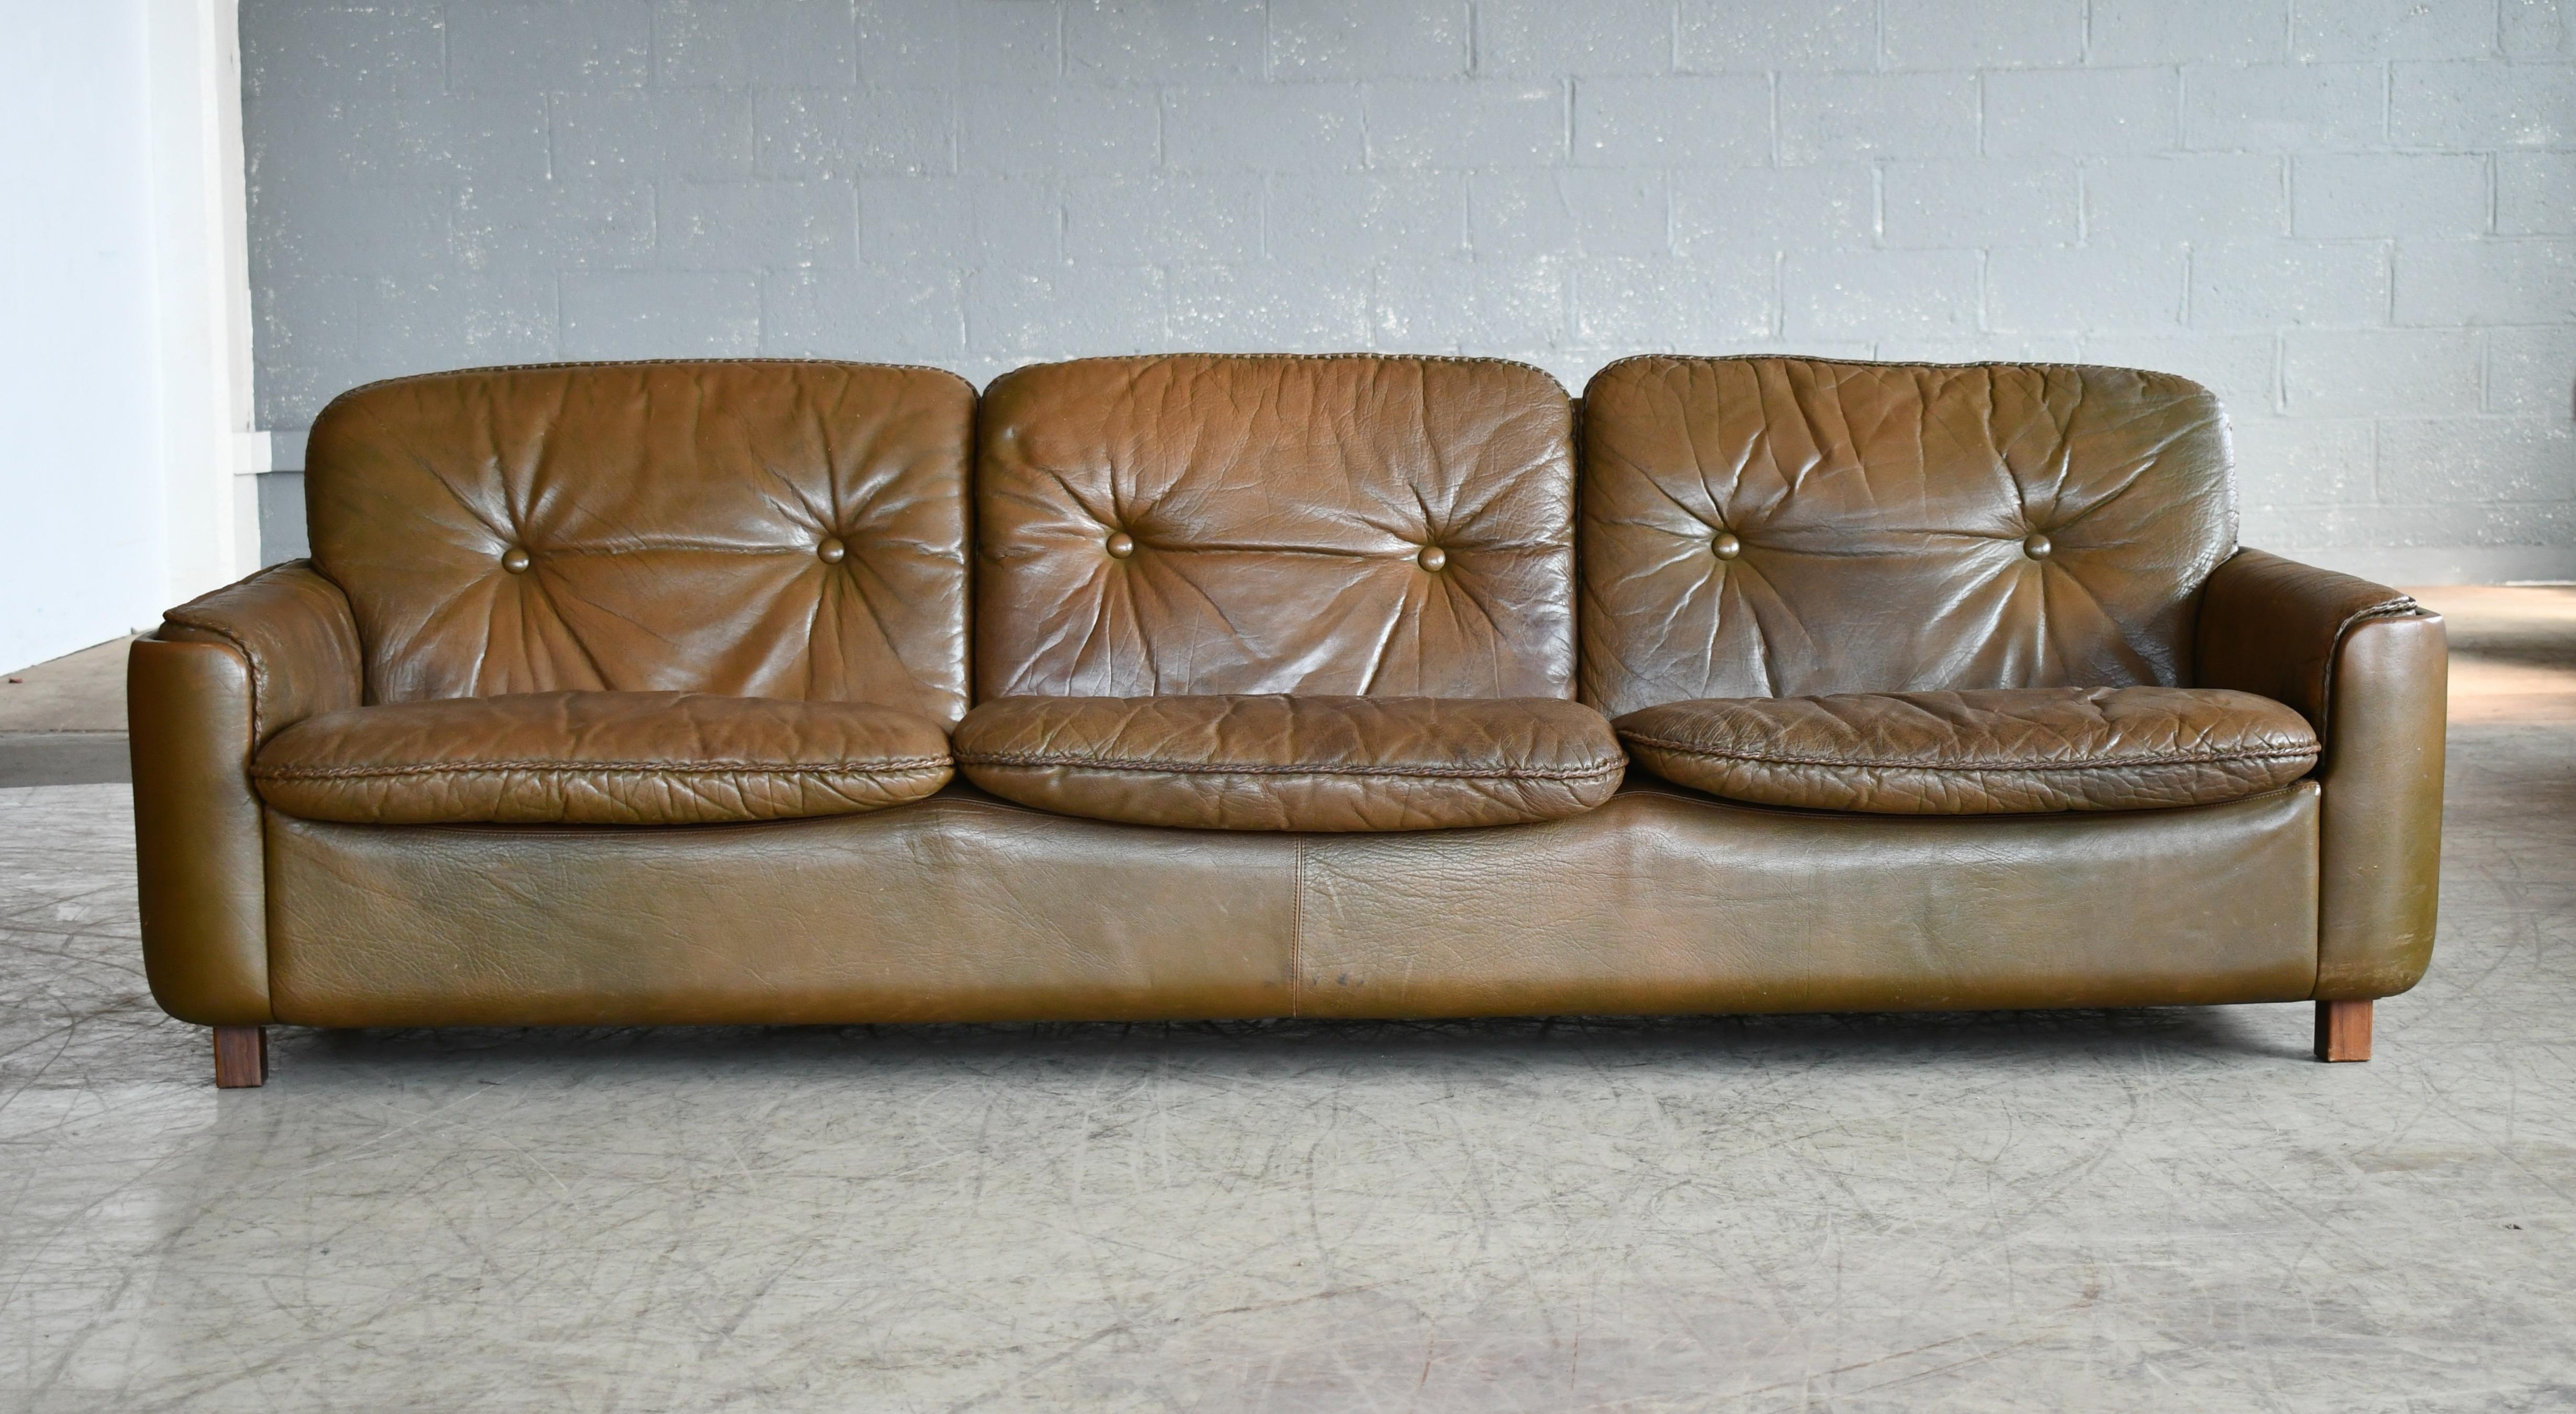 Beautiful high quality Scandinavian Modern 3-seat leather sofa in olive brown buffalo leather designed by Sigurd Ressell in the early 1970s for Vatne Mobler of Norway. Thick supple leather showing some beautiful patina and with the original brown